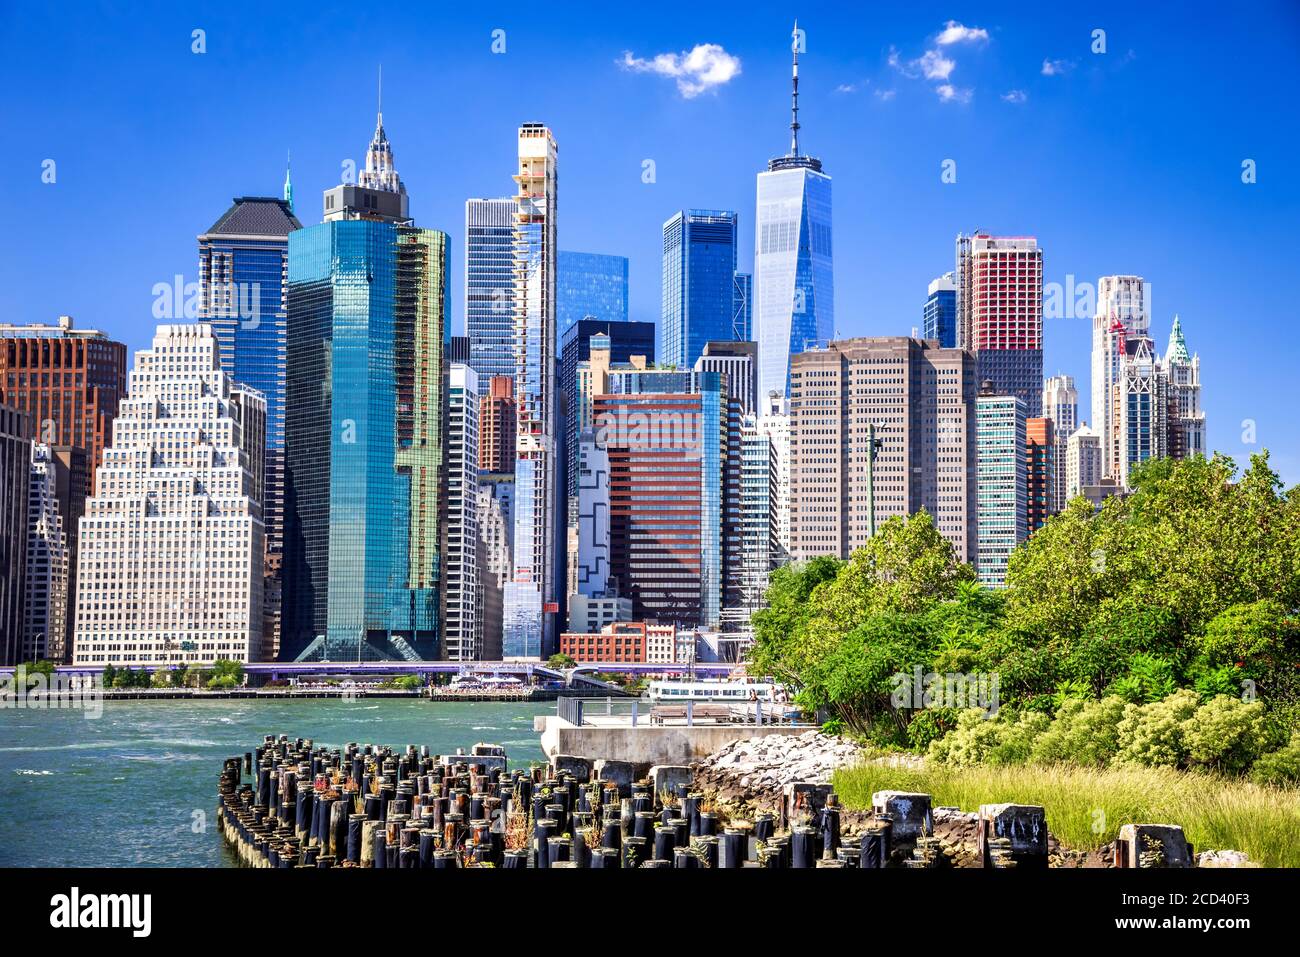 New York, USA - Sunny view of lower Manhattan Skyline from Brooklyn Park, United States of America. Stock Photo